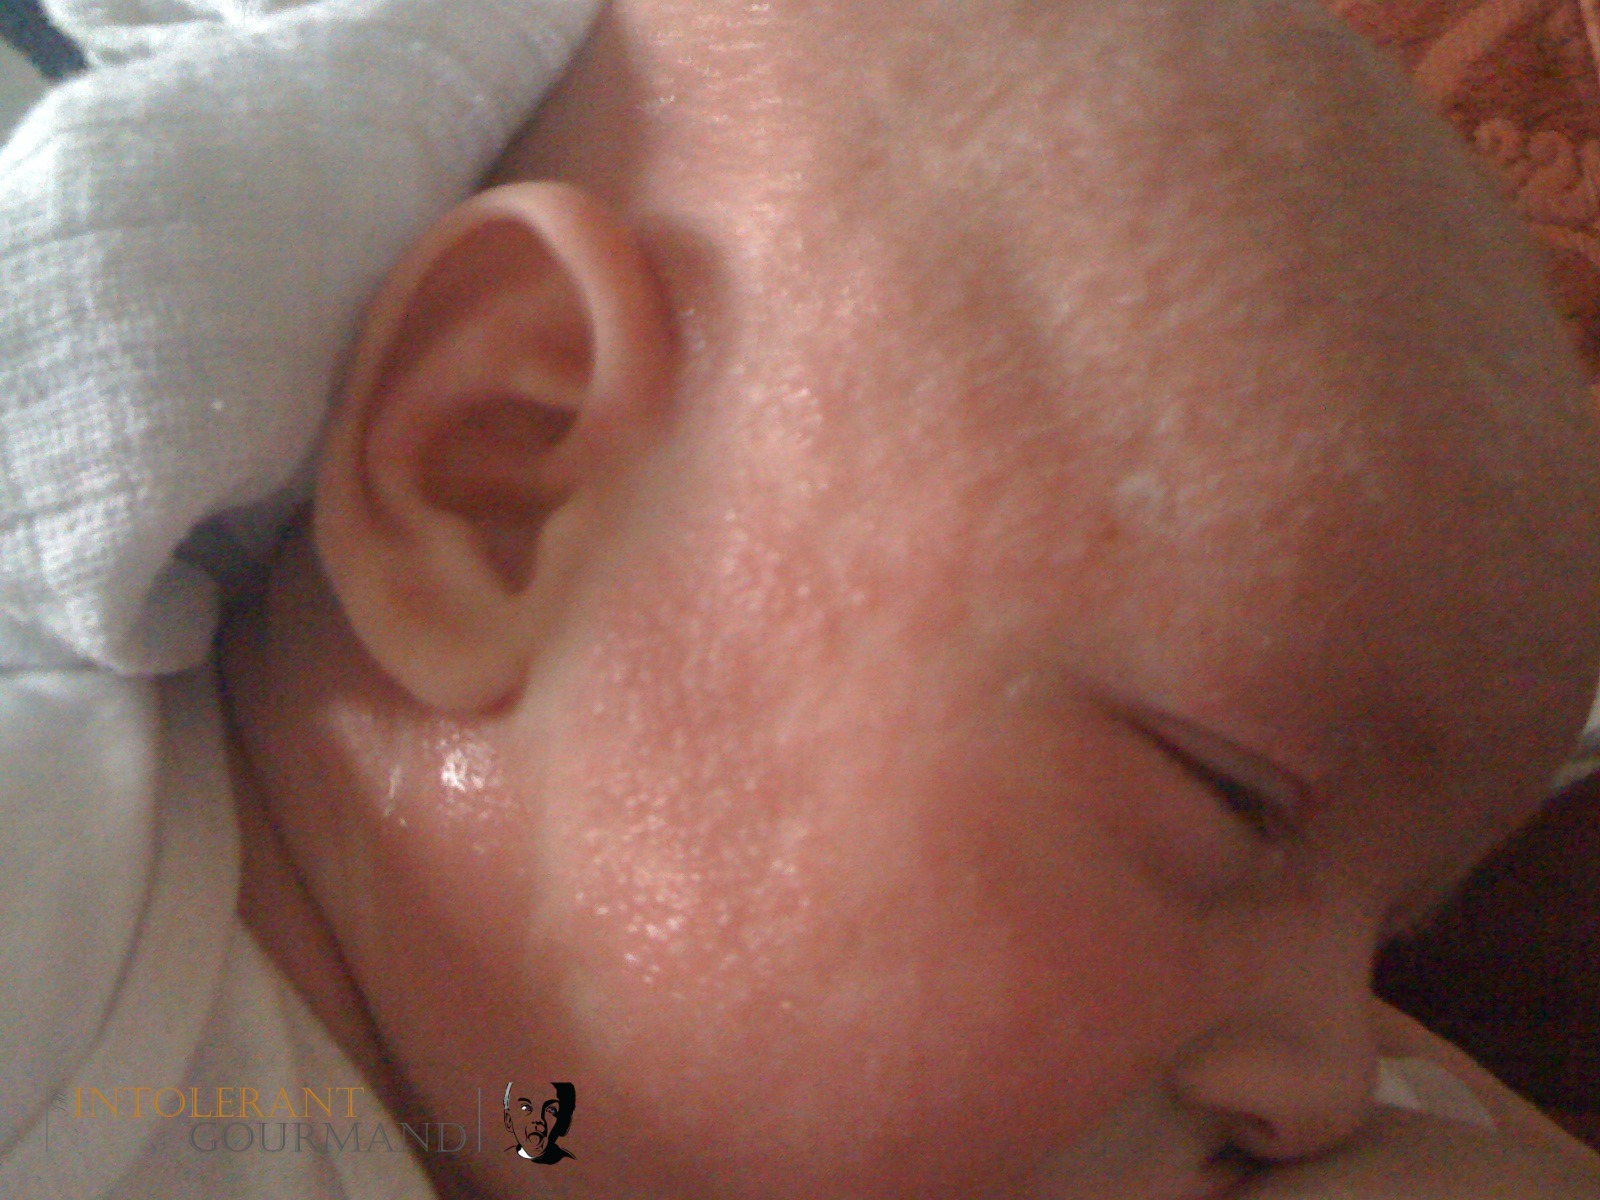 8 weeks old severe reaction - the realities of a severe allergic reaction. Urticaria. Swollen eyes and in fact whole body. Rash. Pus. Difficulty breathing. CMPA. www.intolerantgourmand.com